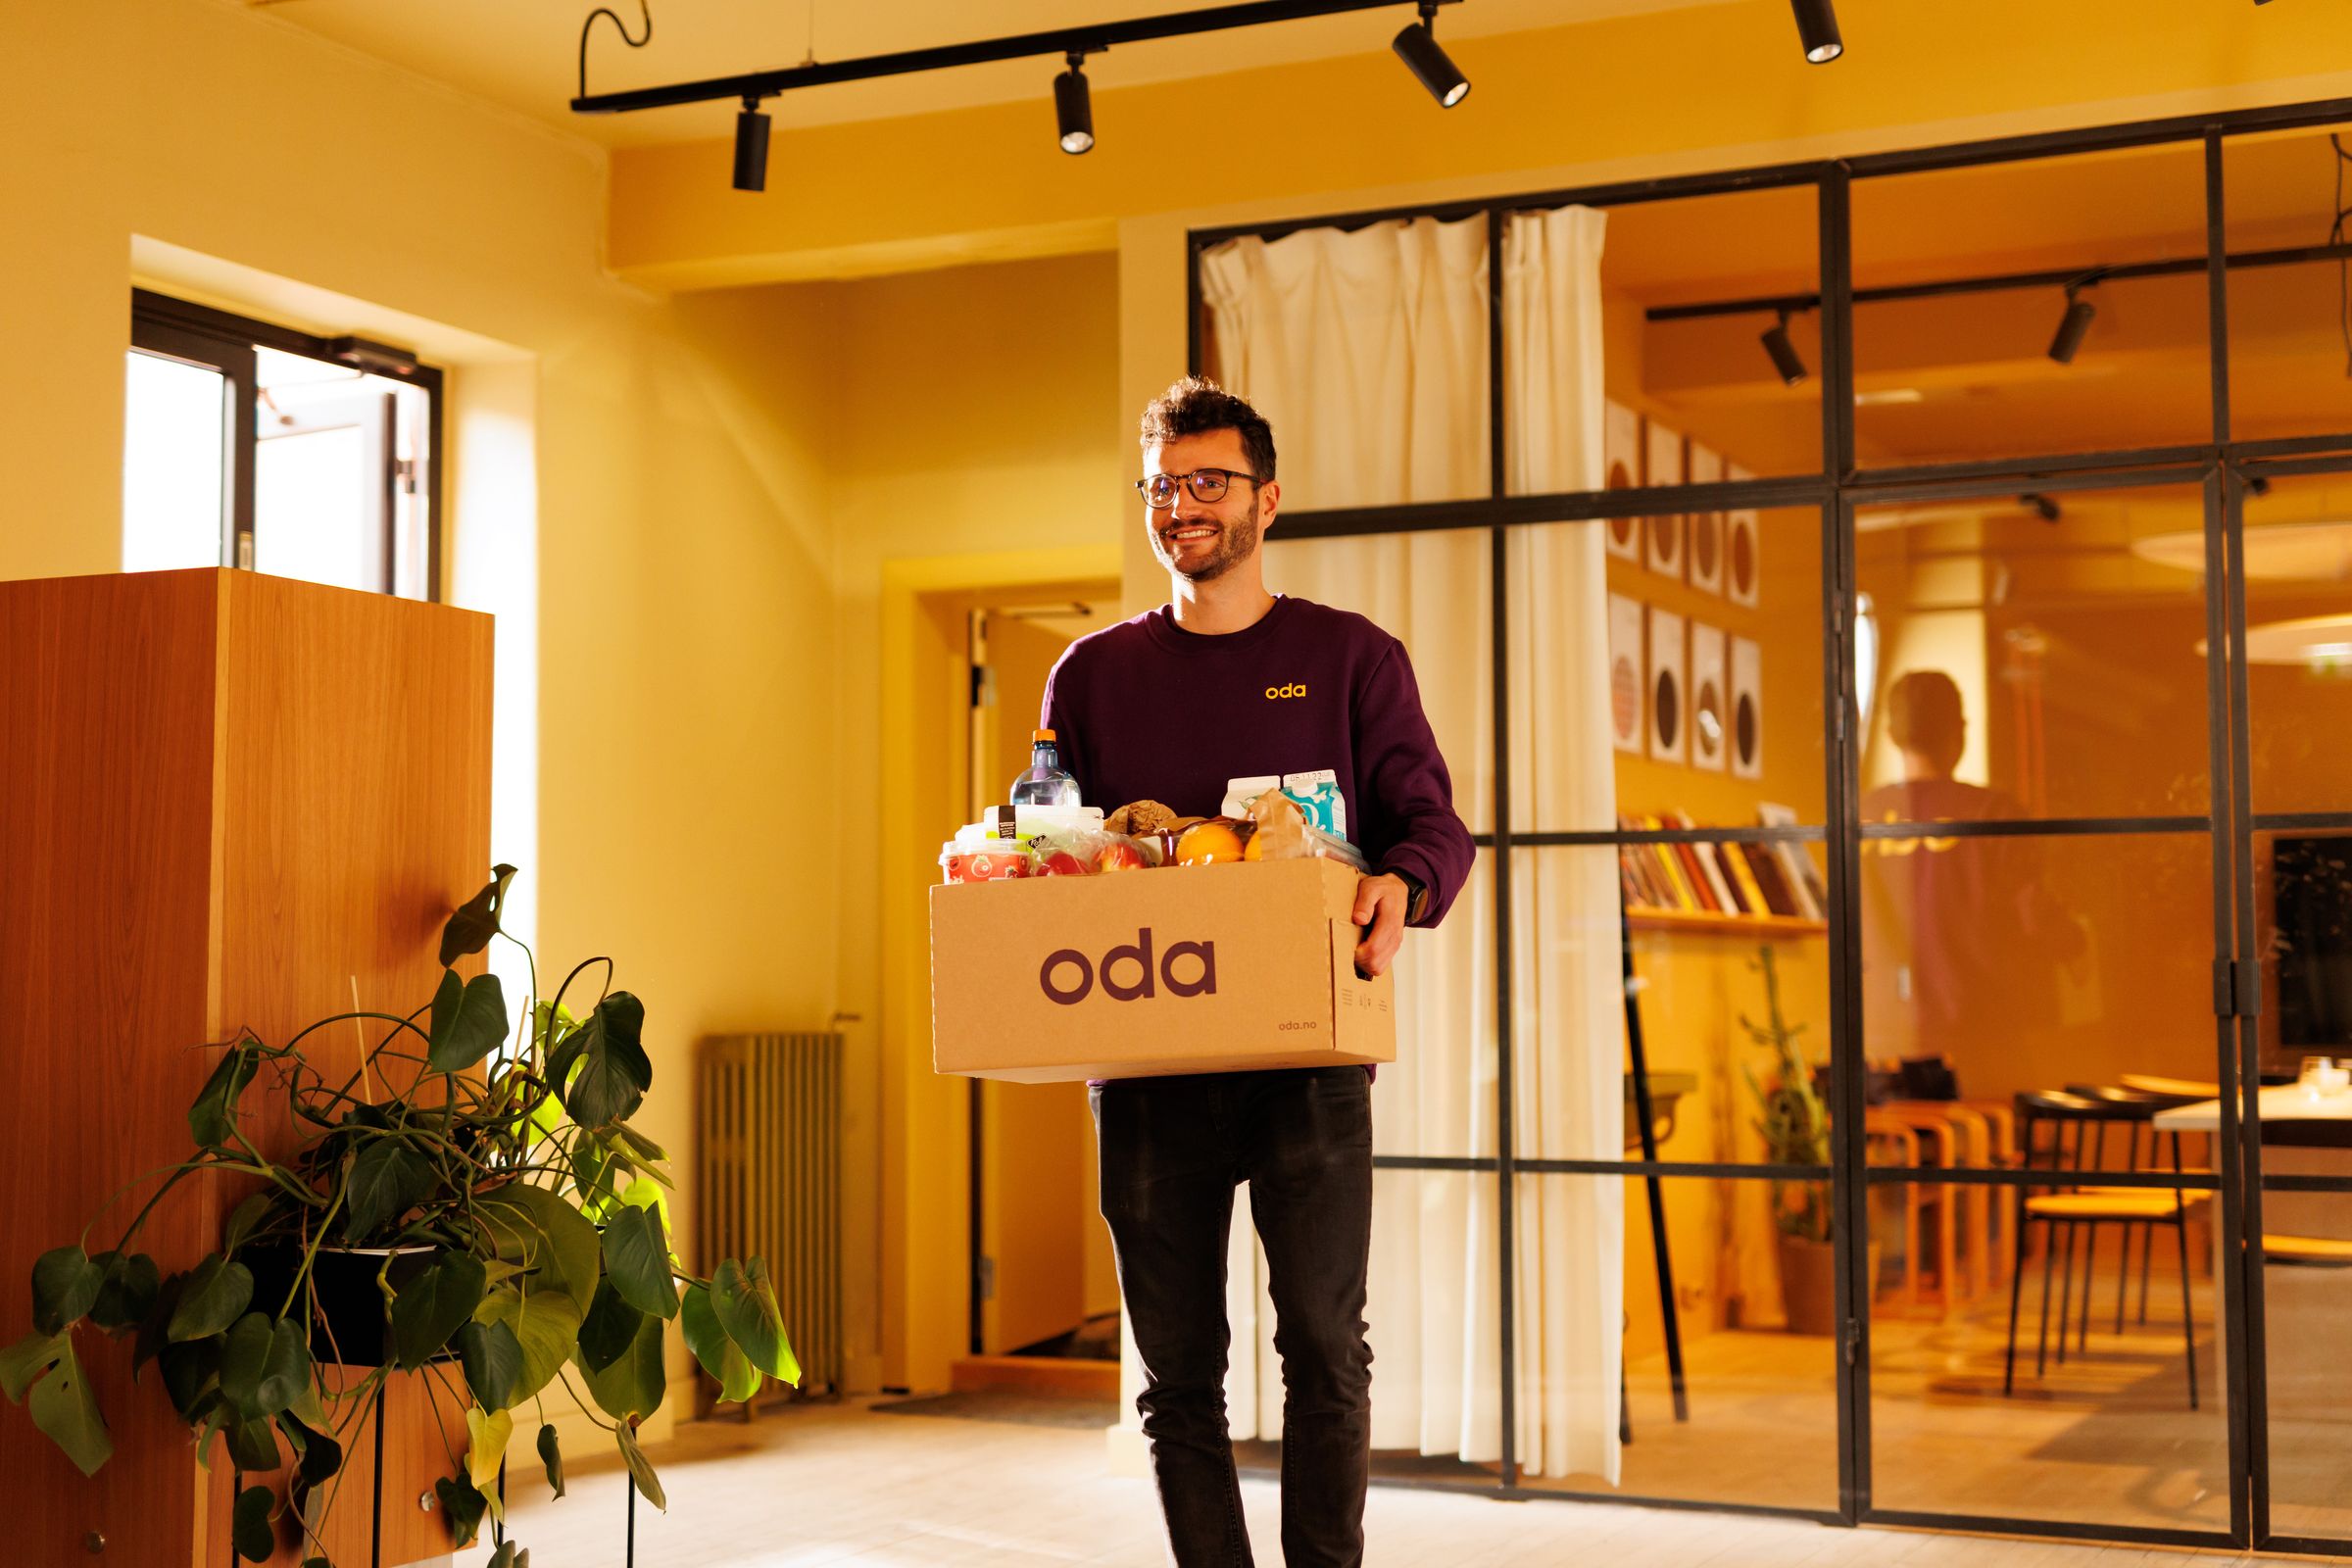 Oda office delivery